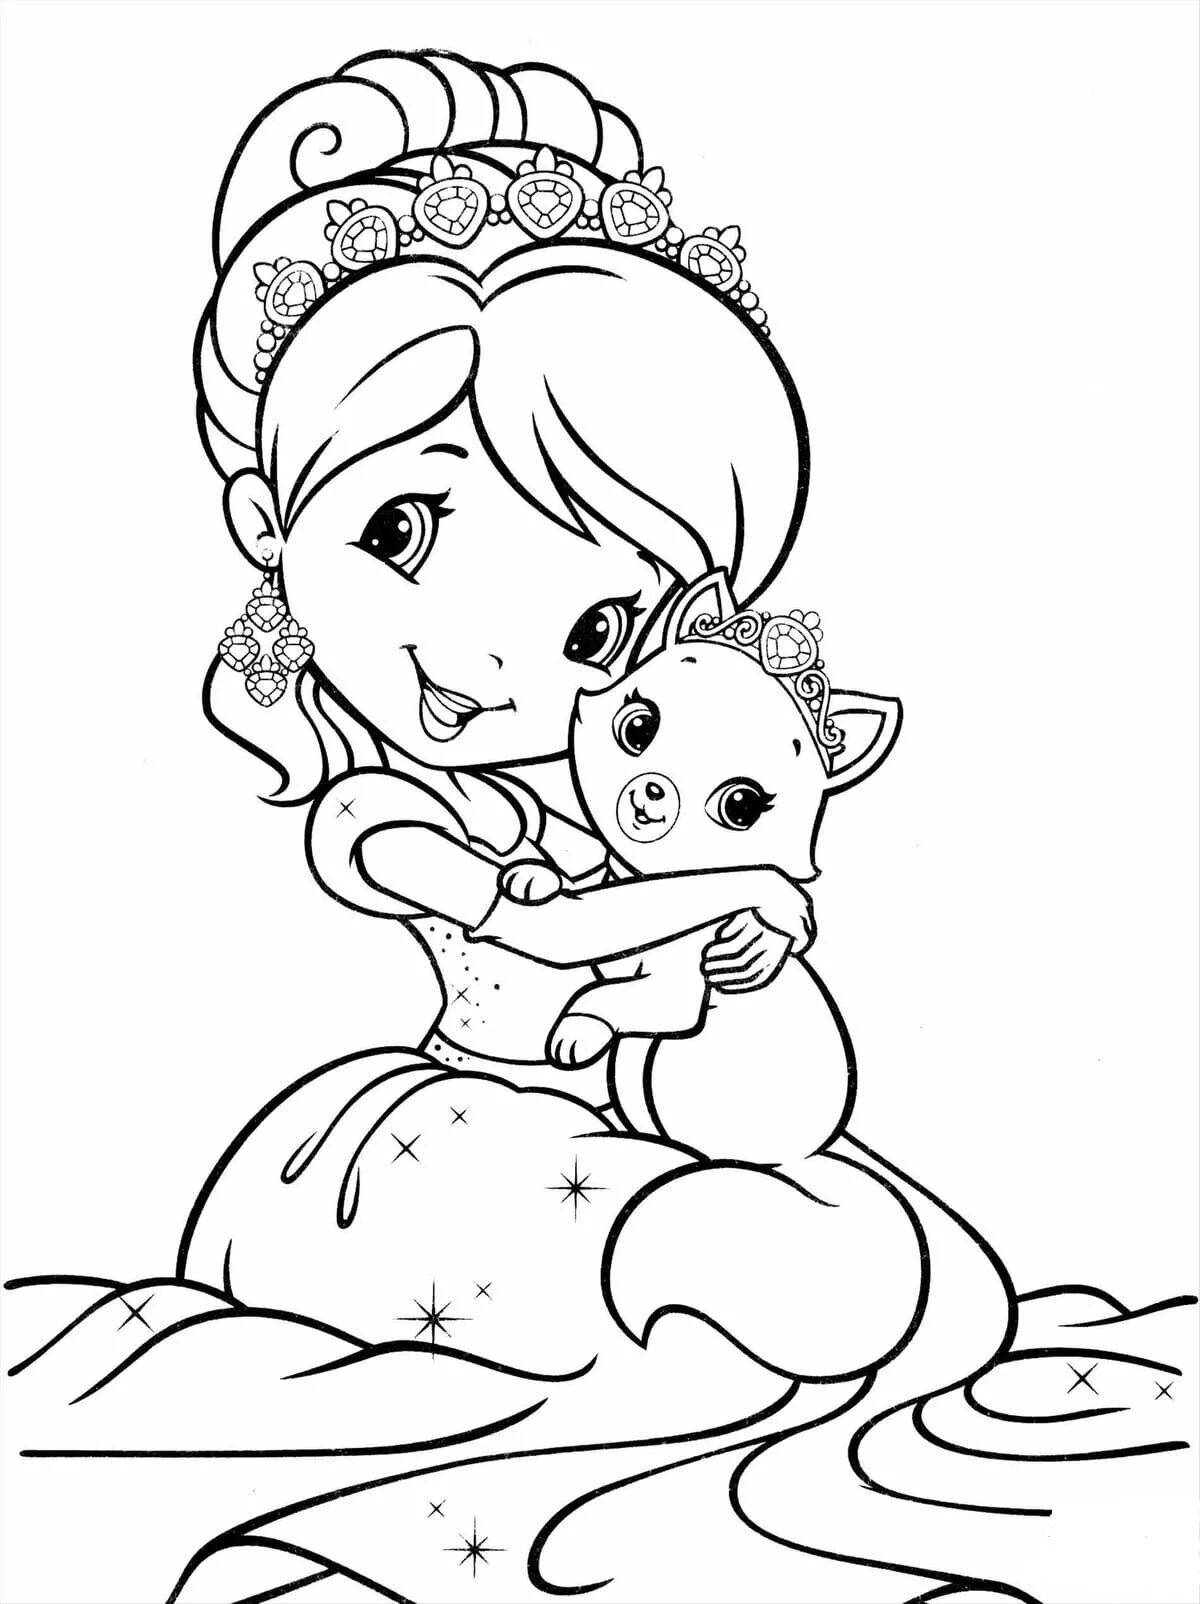 Wonderful princess coloring pages for girls 4-5 years old